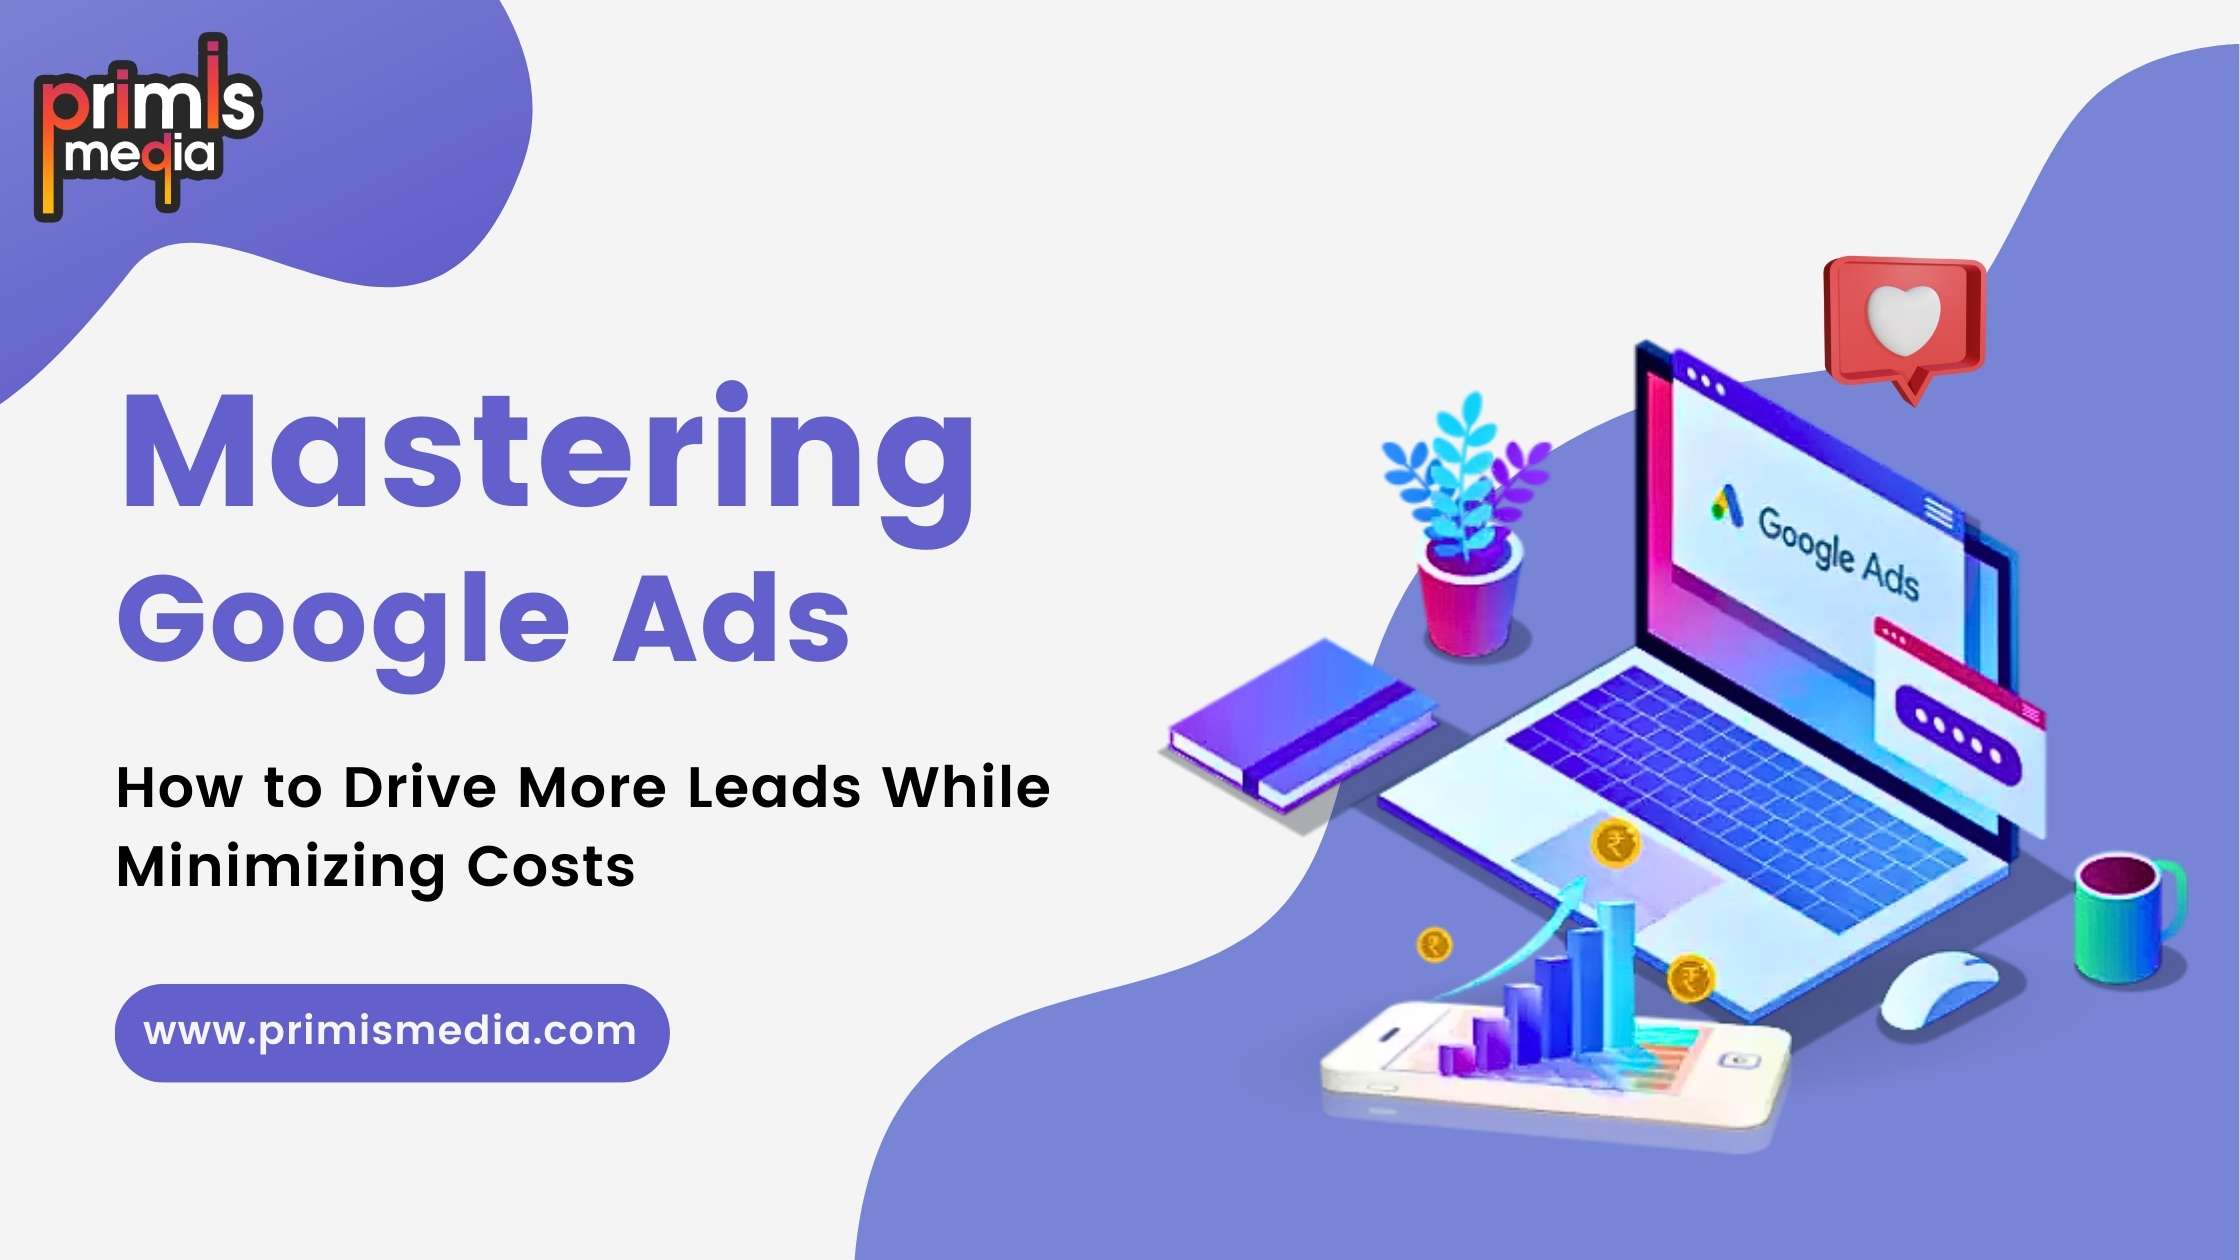 Mastering Google Ads: How to Drive More Leads While Minimizing Costs